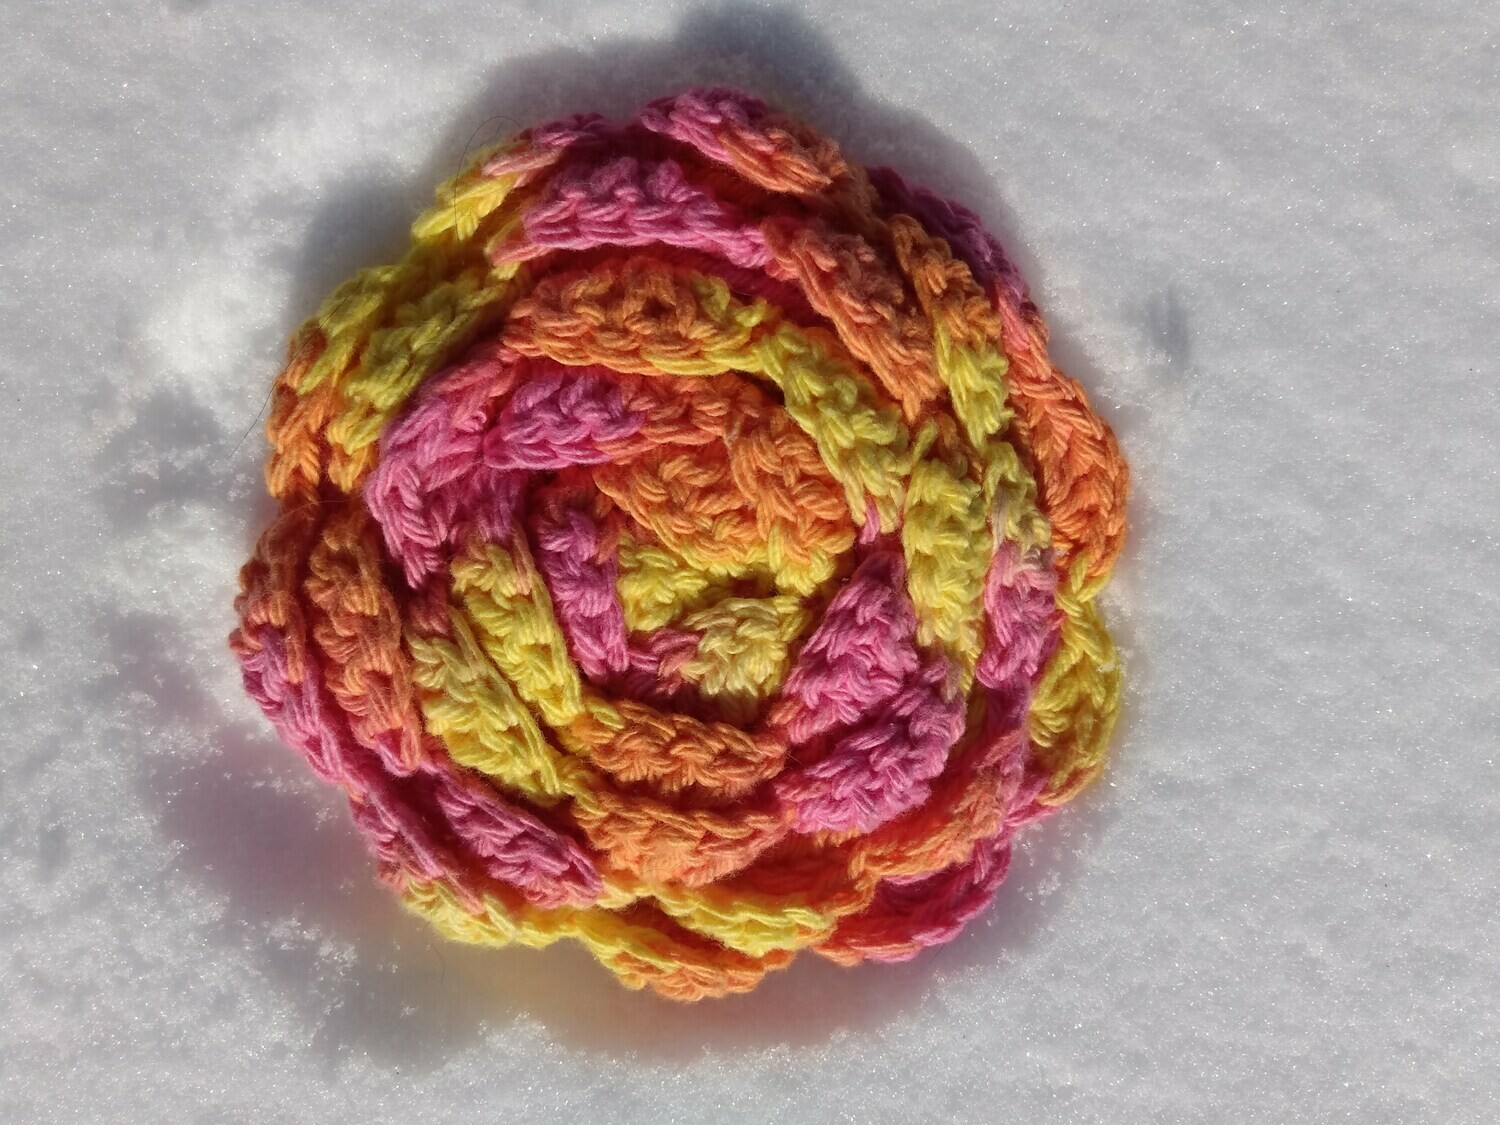 Crocheted Cotton Loofah Orange and Pink Varigated